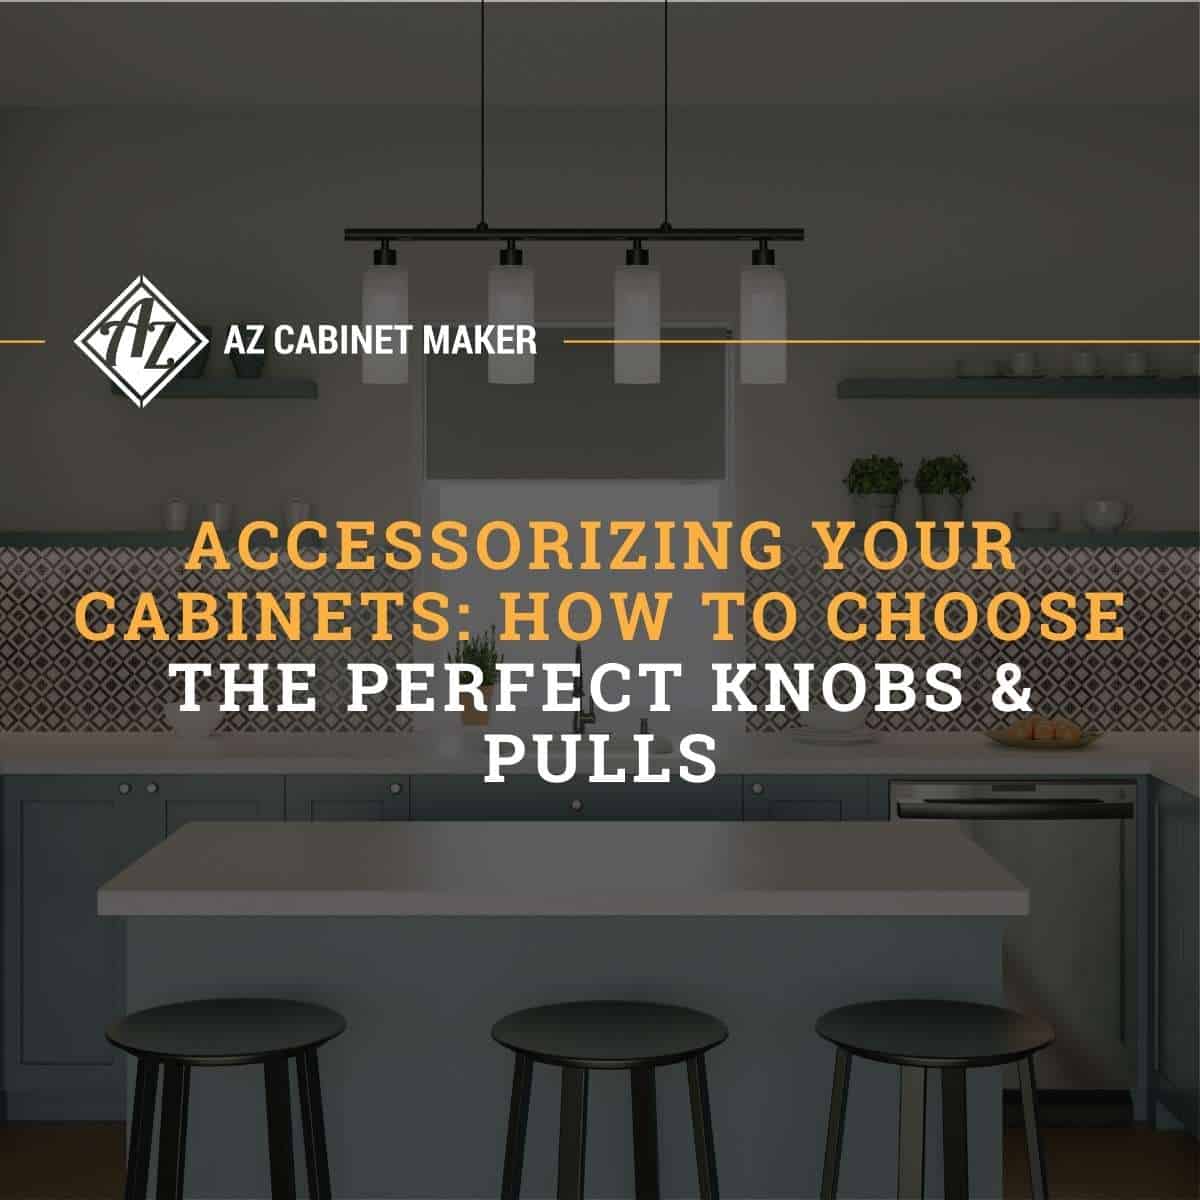 Accessorizing Your Cabinets How To Choose The Perfect Knobs & Pulls